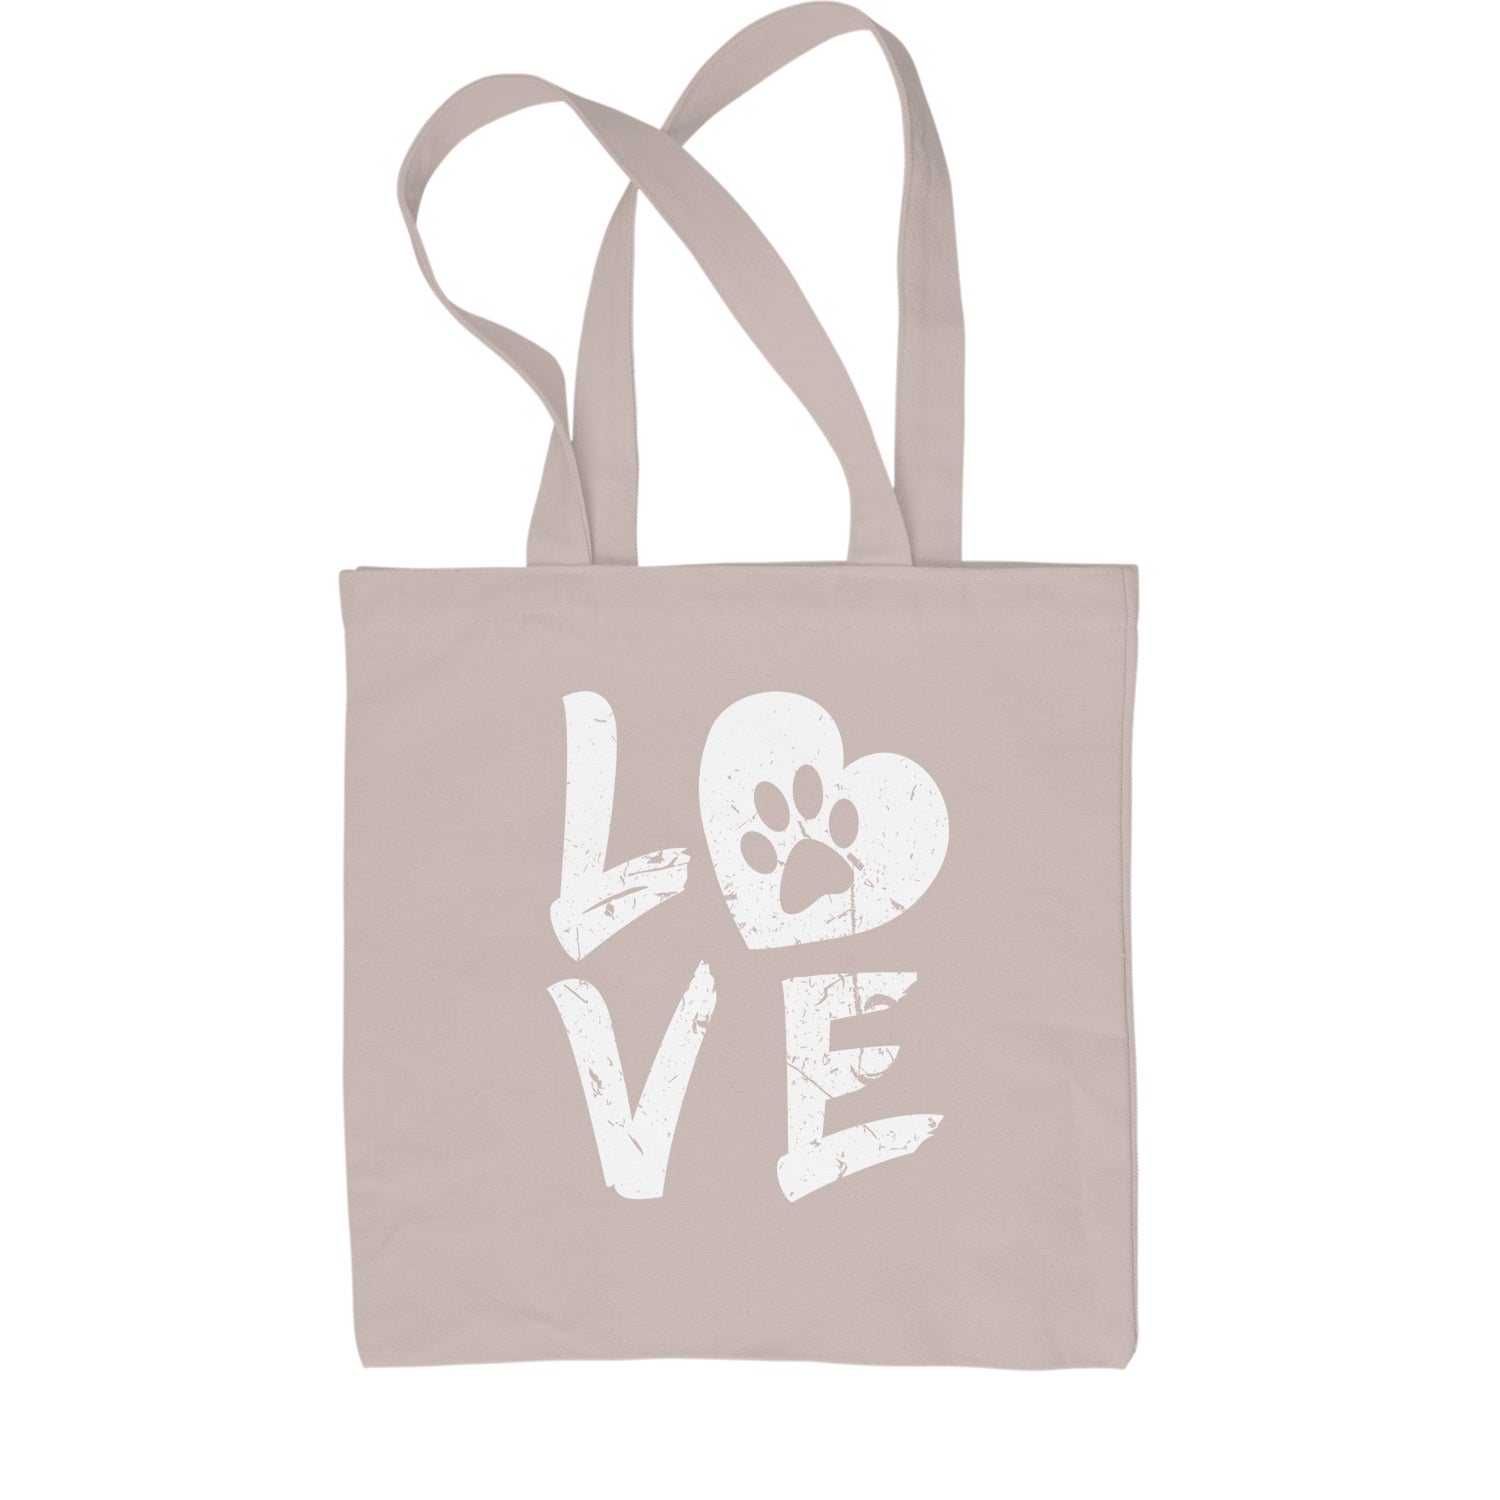 I Love My Dog Paw Print Shopping Tote Bag dog, doggie, heart, love, lover, paw, print, puppy by Expression Tees